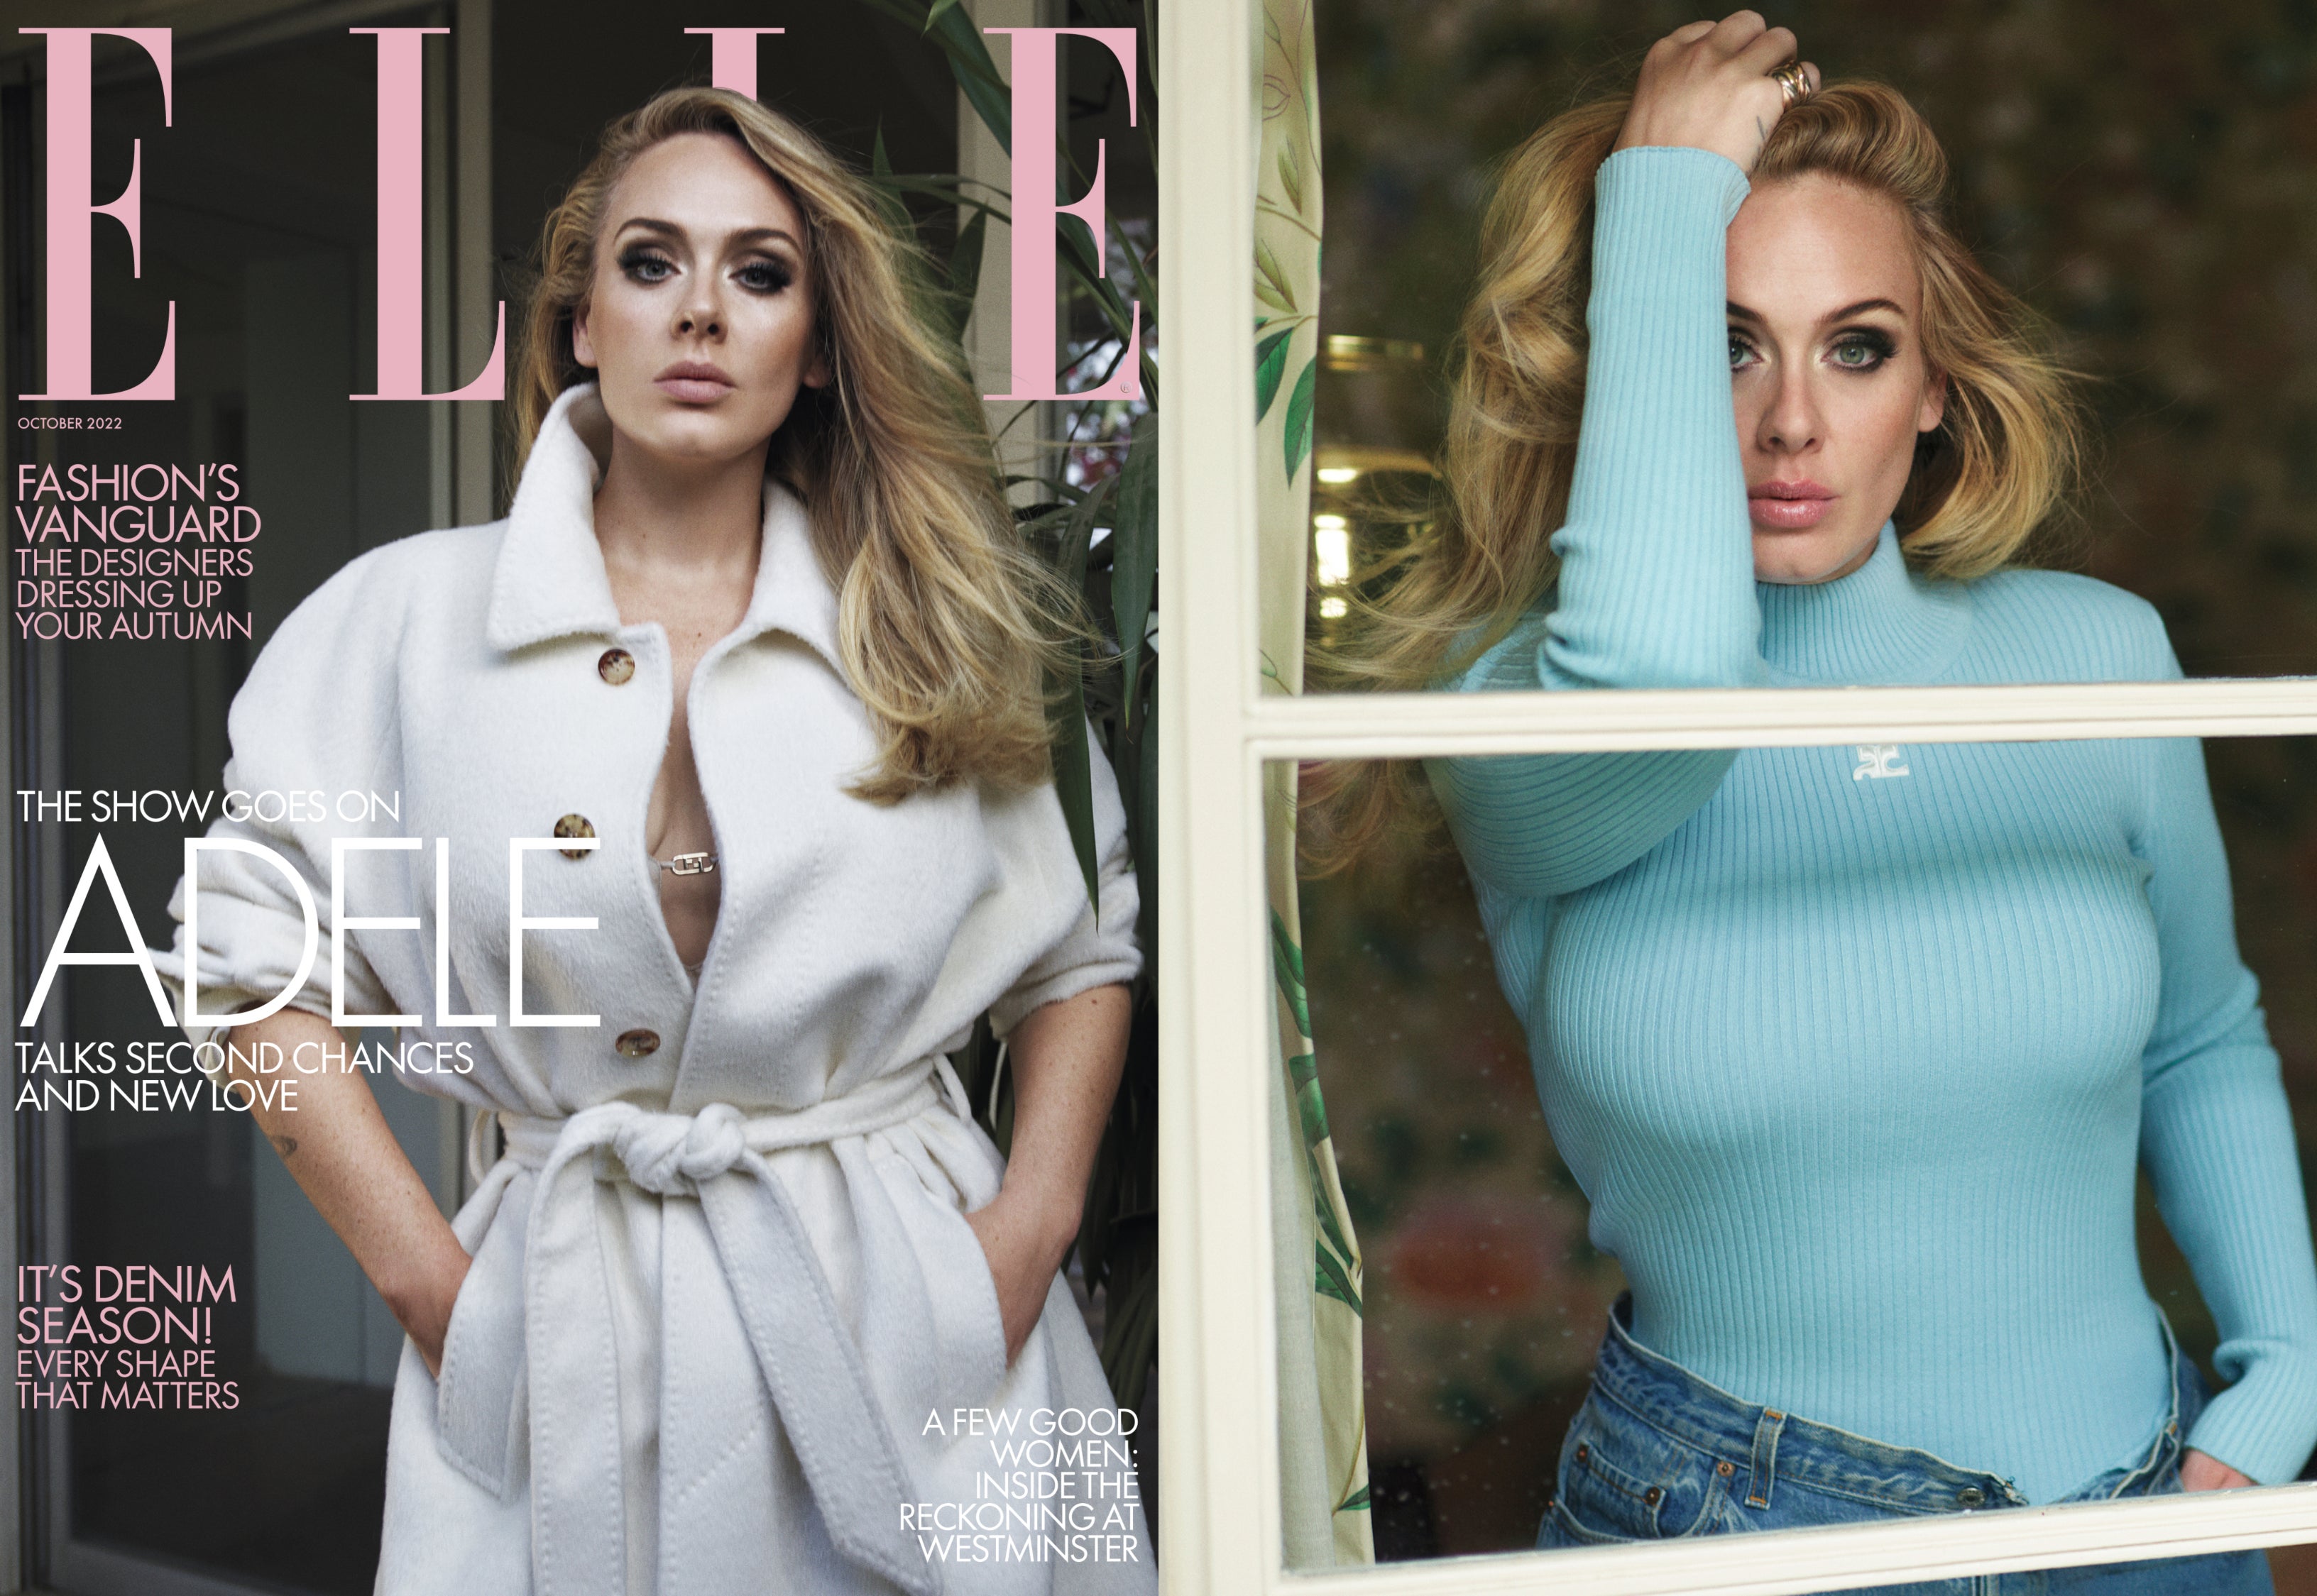 Adele on the cover of Elle UK